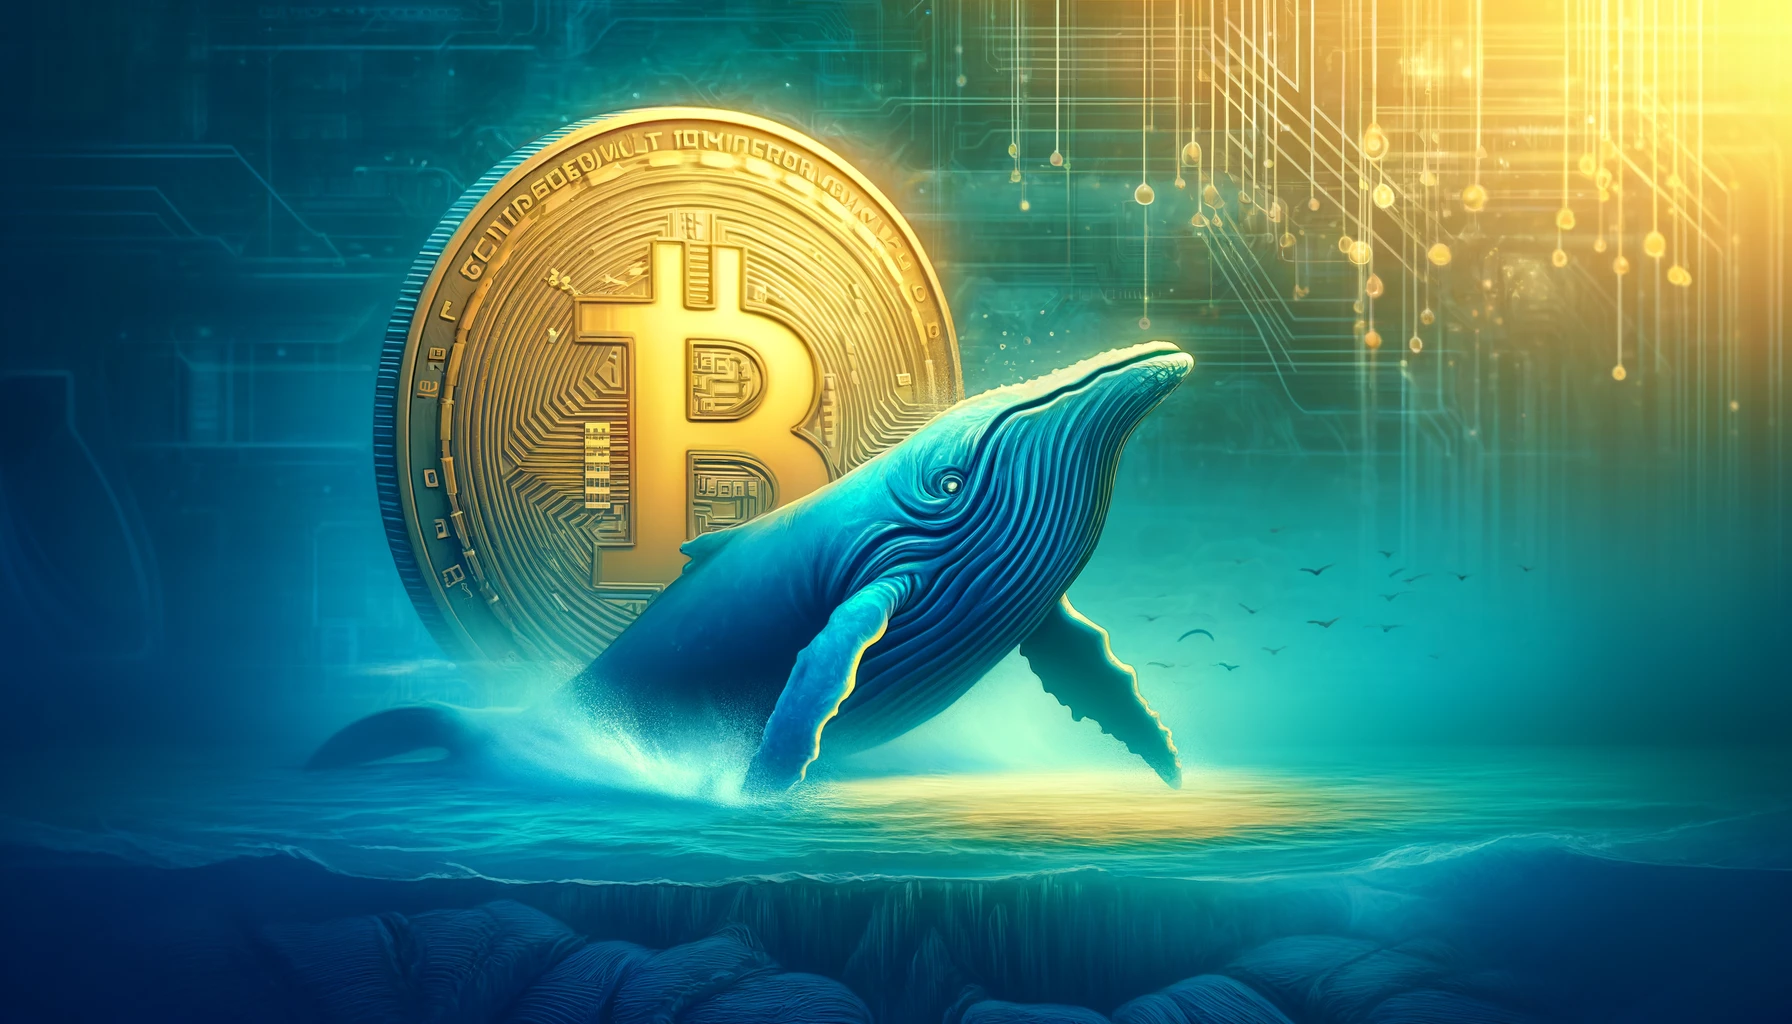 Bitcoin whale indicator flashes buy signal